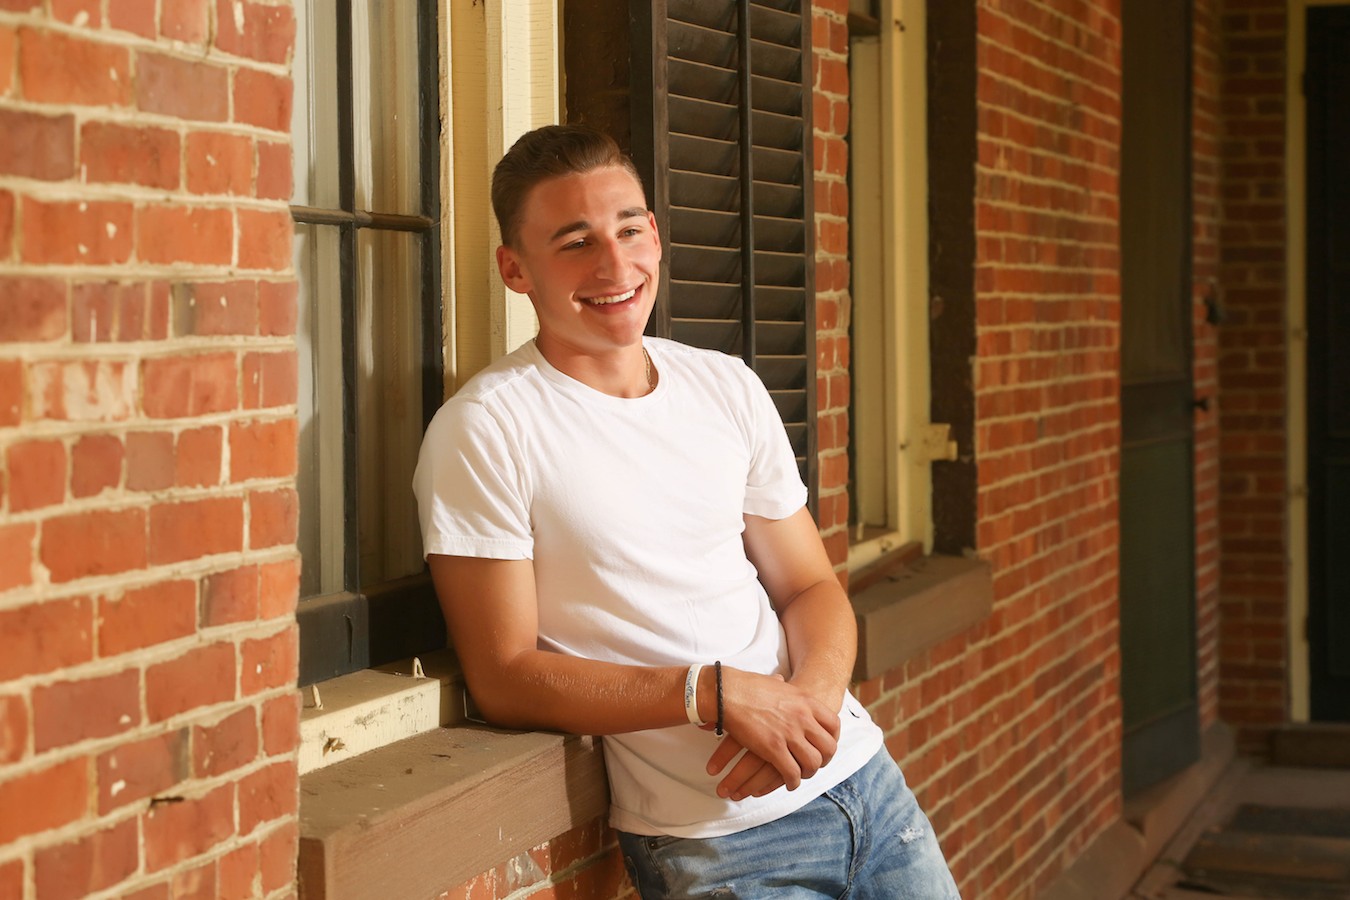 Old Wethersfield Senior Portrait Session - Brian Ambrose Photography